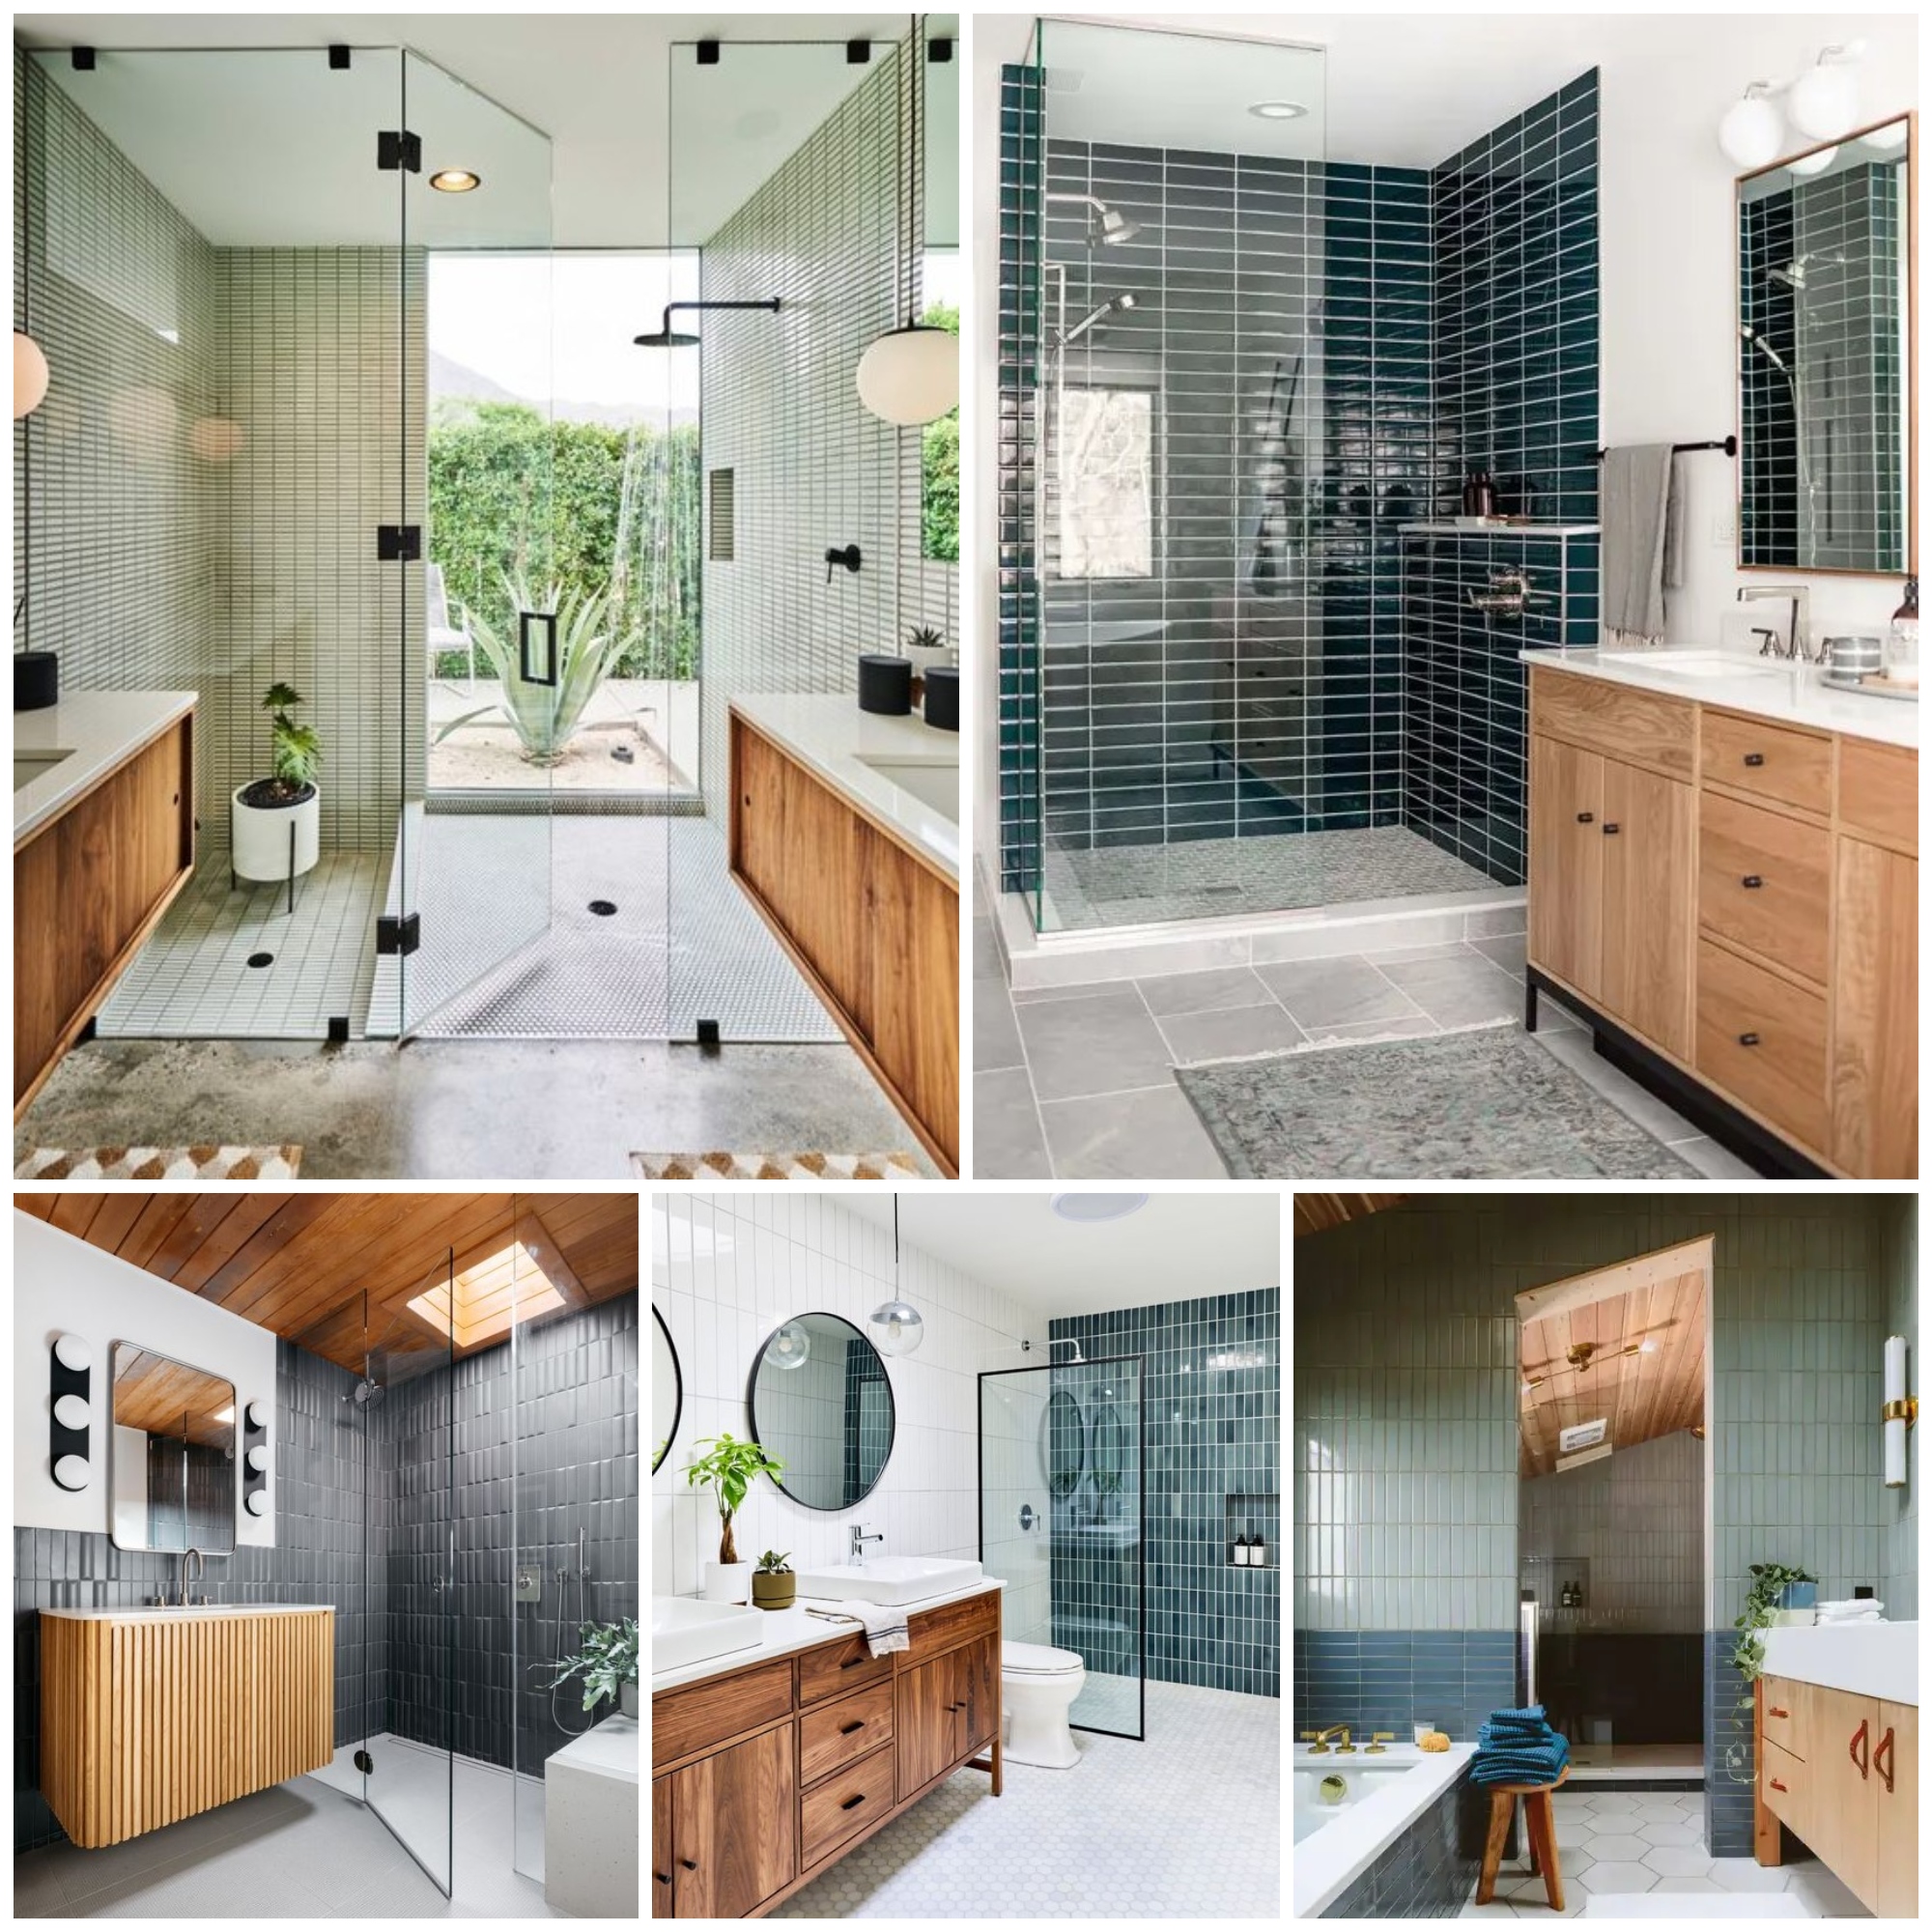 Trending: Stacked Subway Tile Designs for a Contemporary Home